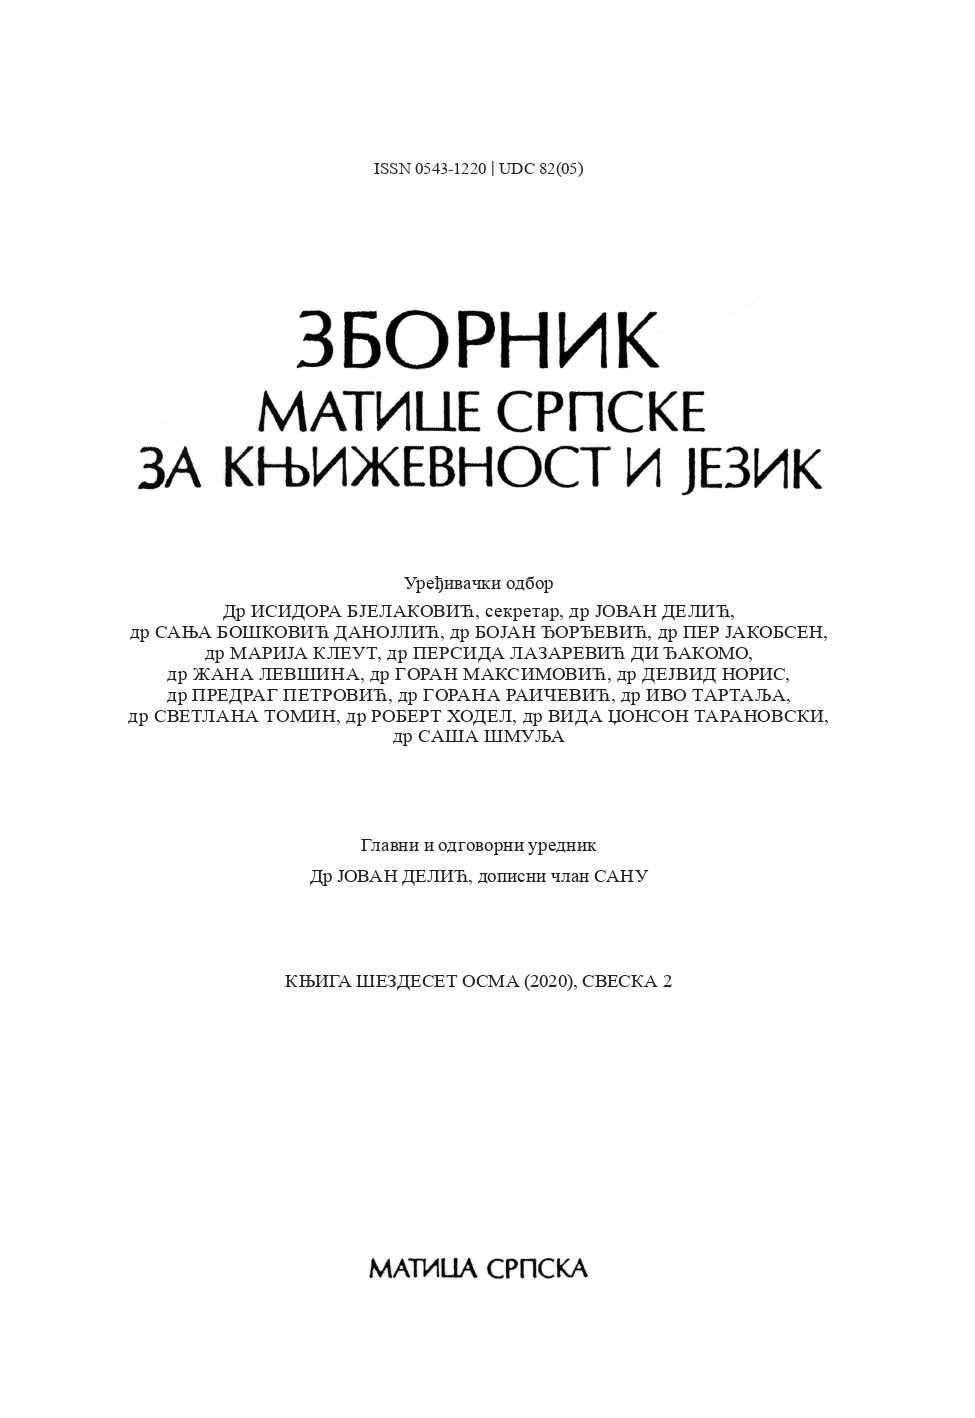 DEVELOPMENT OF LITERARY HISTORICAL IDEA IN SERBIAN SCIENCE OF LITERATURE Cover Image